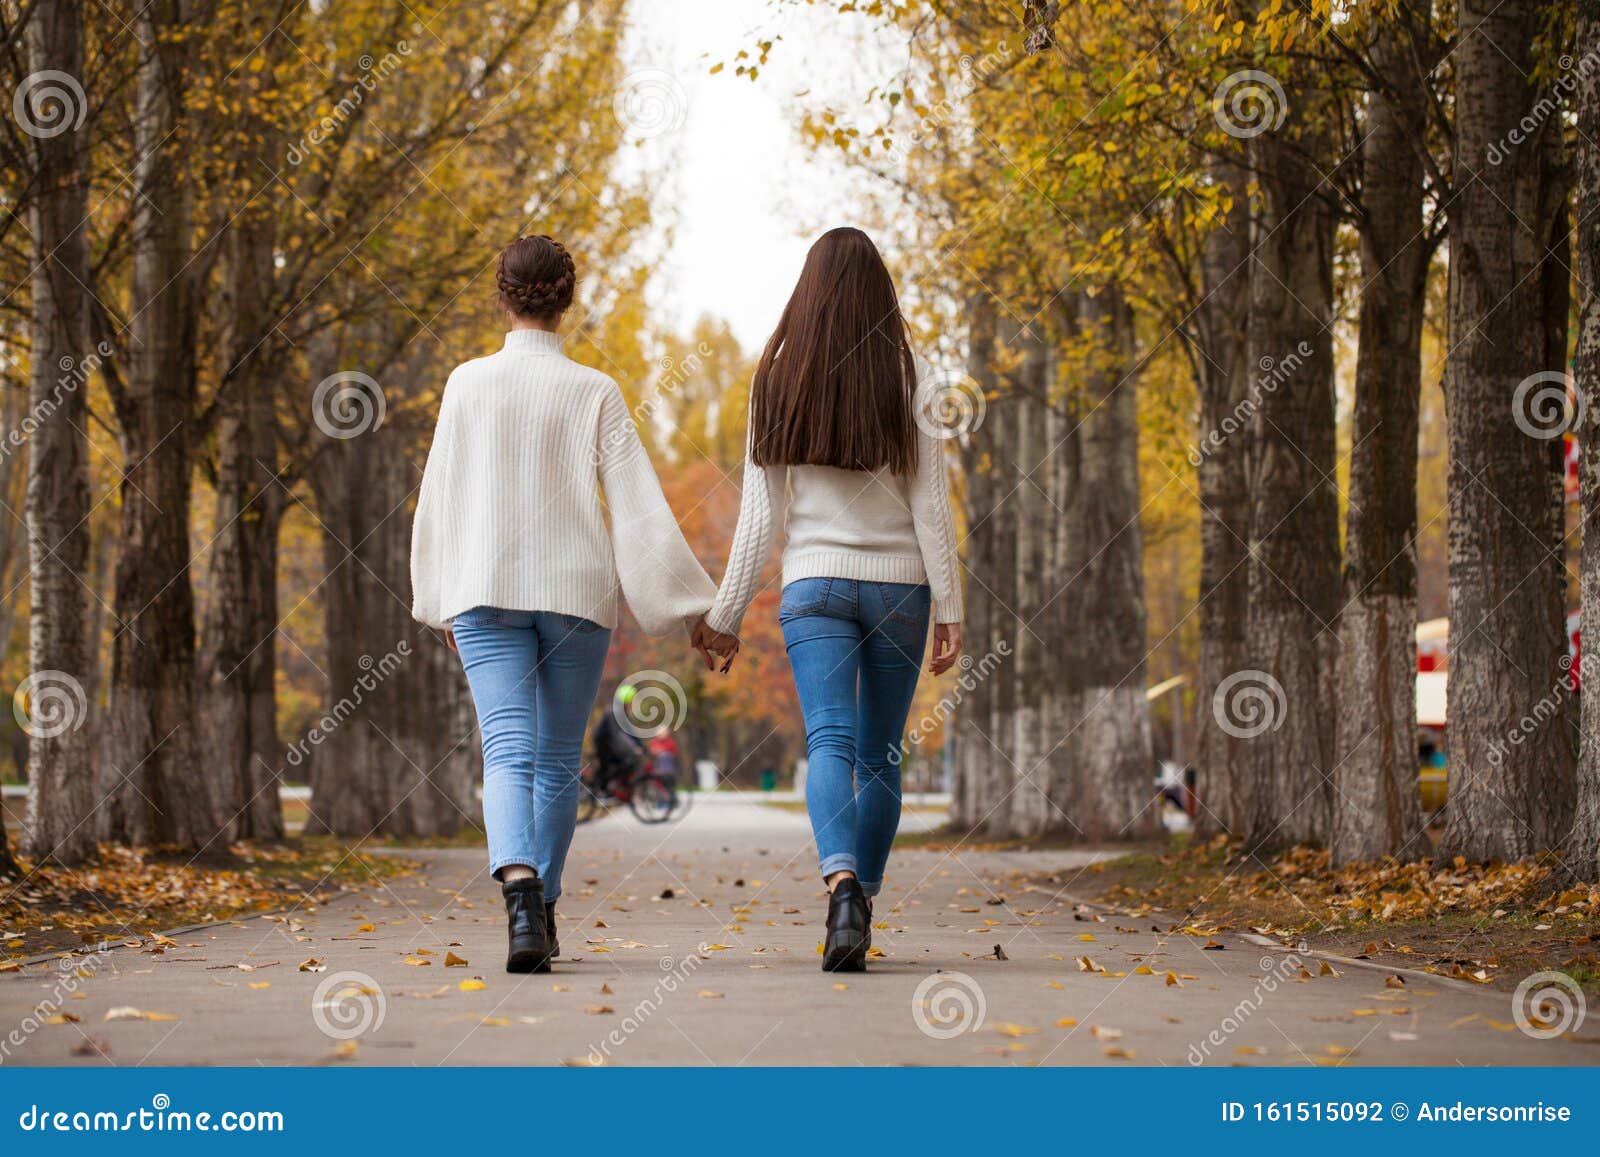 Two Girlfriends in a White Woolen Sweater and Blue Jeans Stock Photo ...